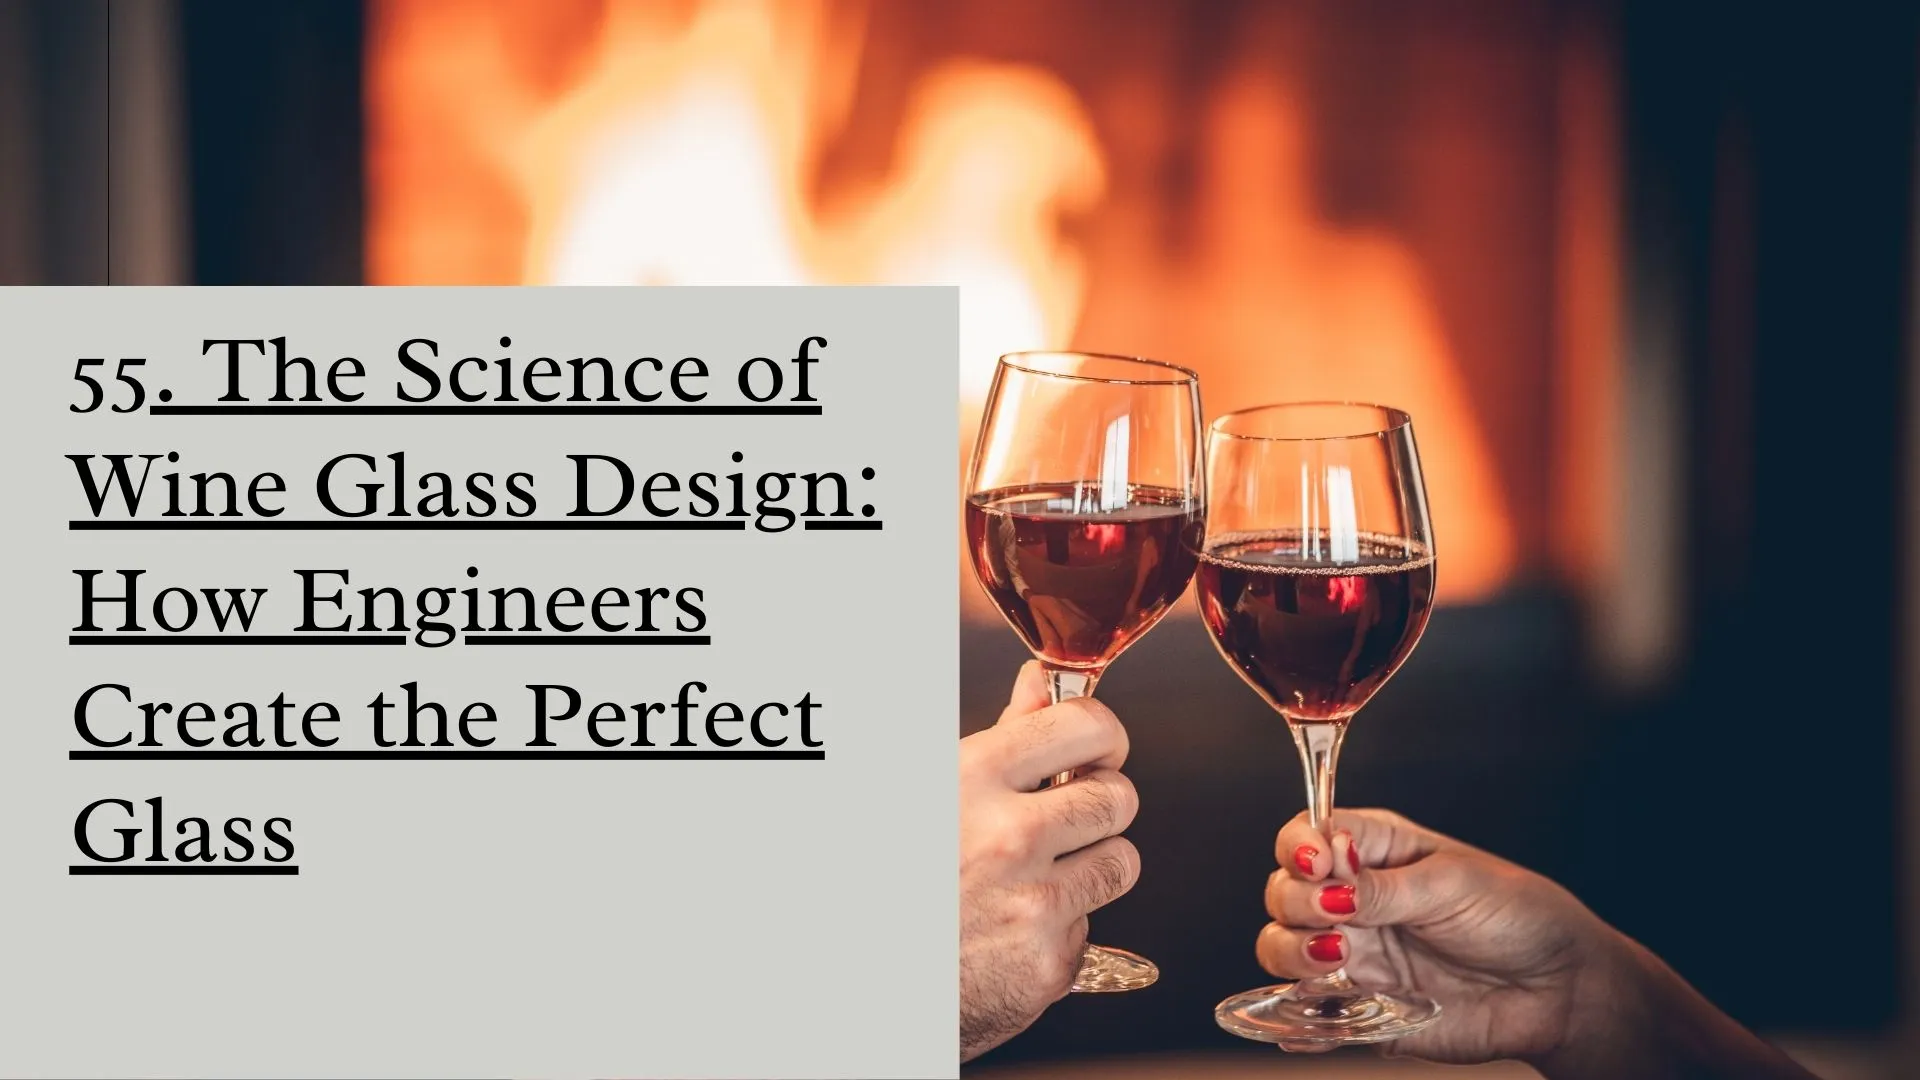 The Science of Wine Glass Design